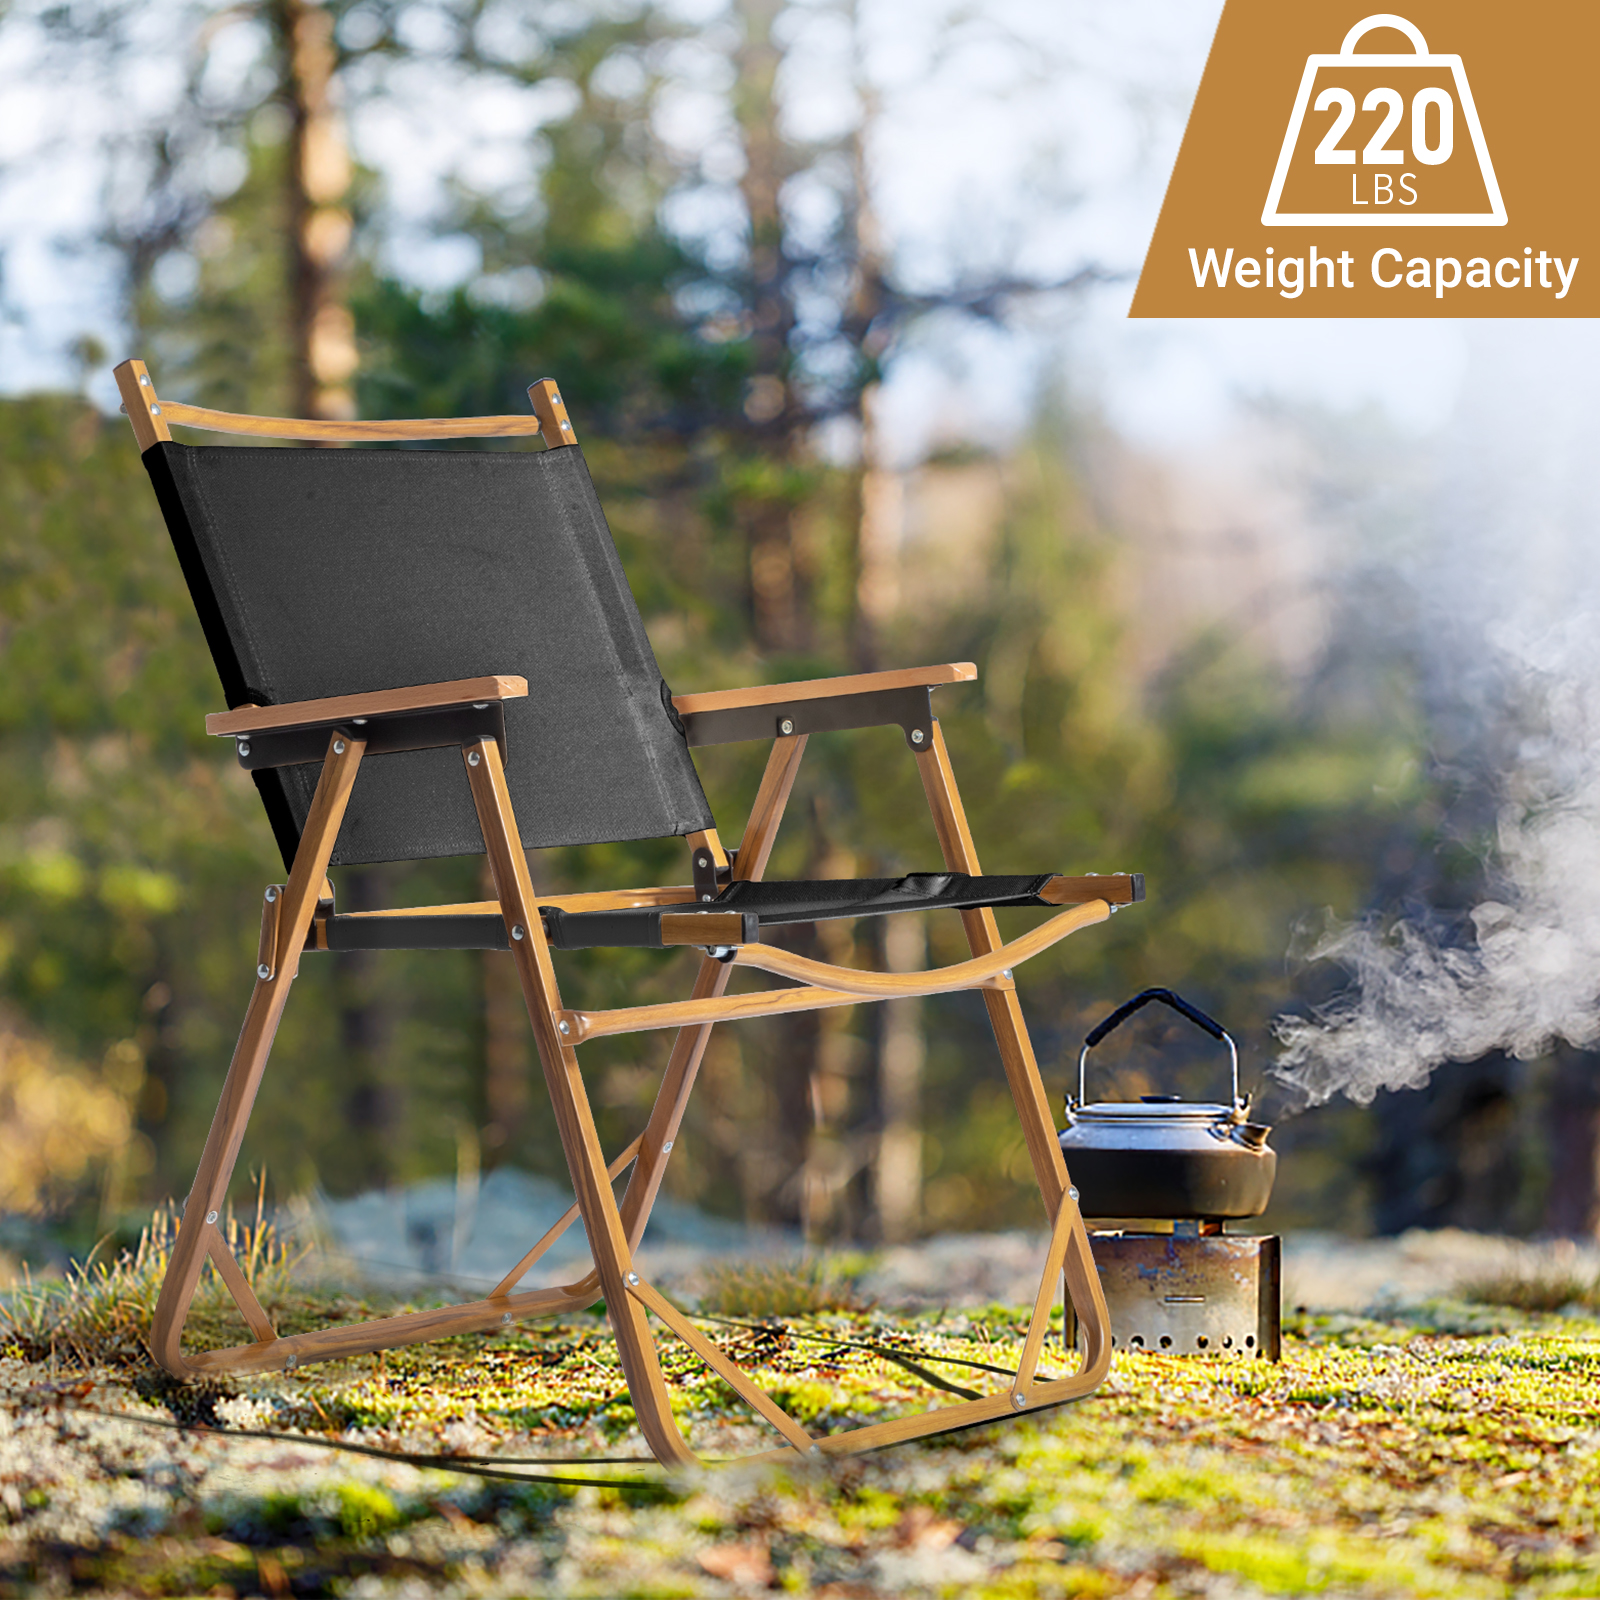 UBesGoo Camping Chairs Outdoors with Versatile Sports Chair Outdoor Chair & Lawn Chair Black - image 1 of 7